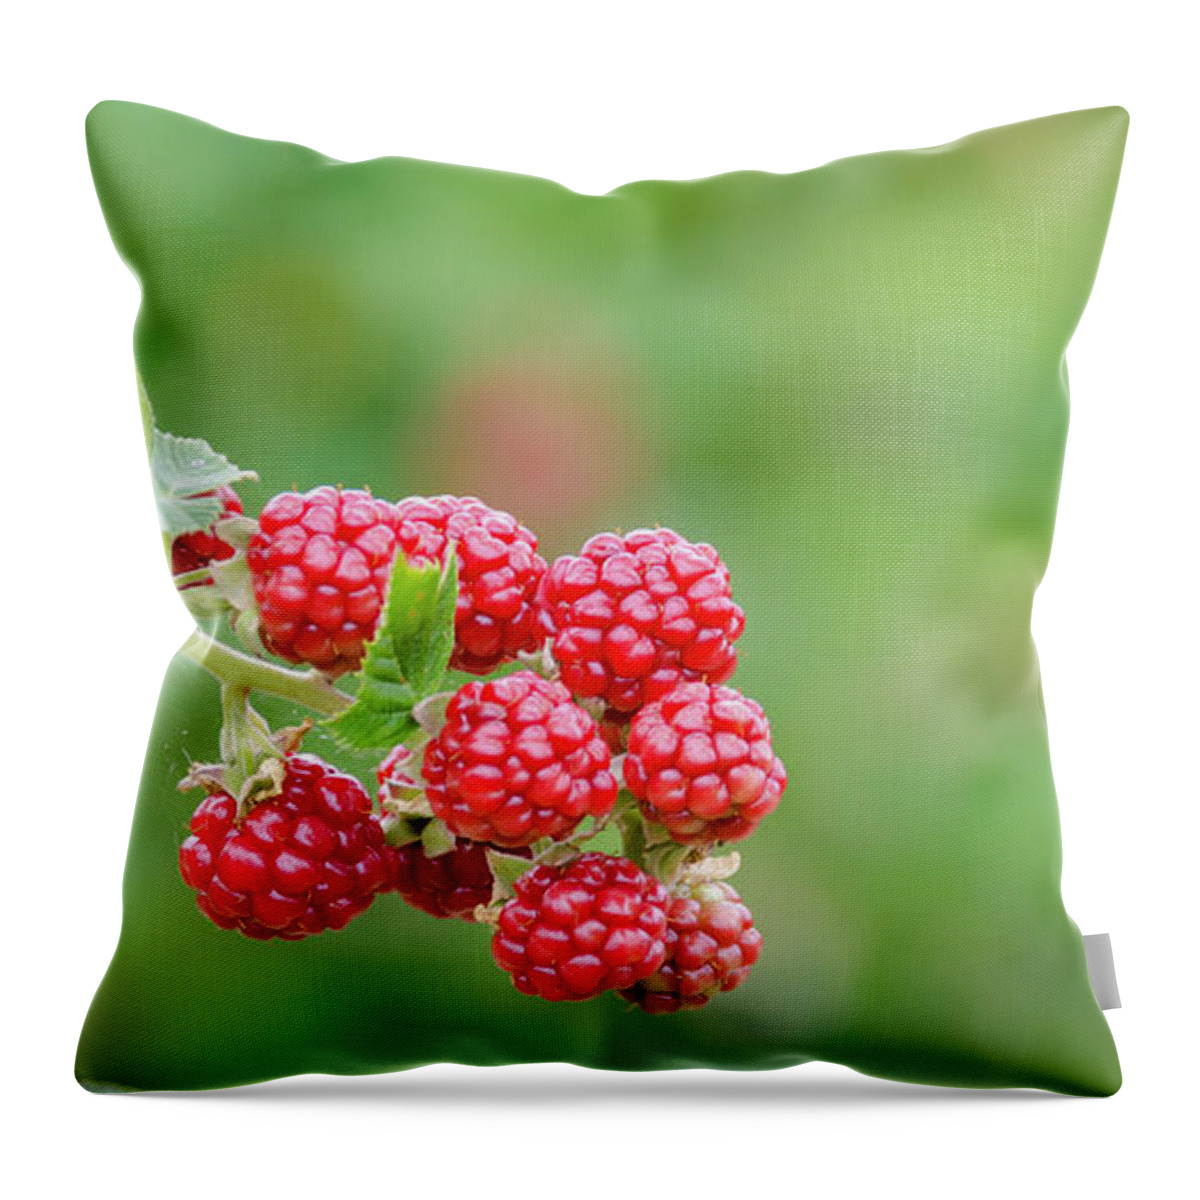 Red Throw Pillow featuring the photograph Berries by Andrea Anderegg